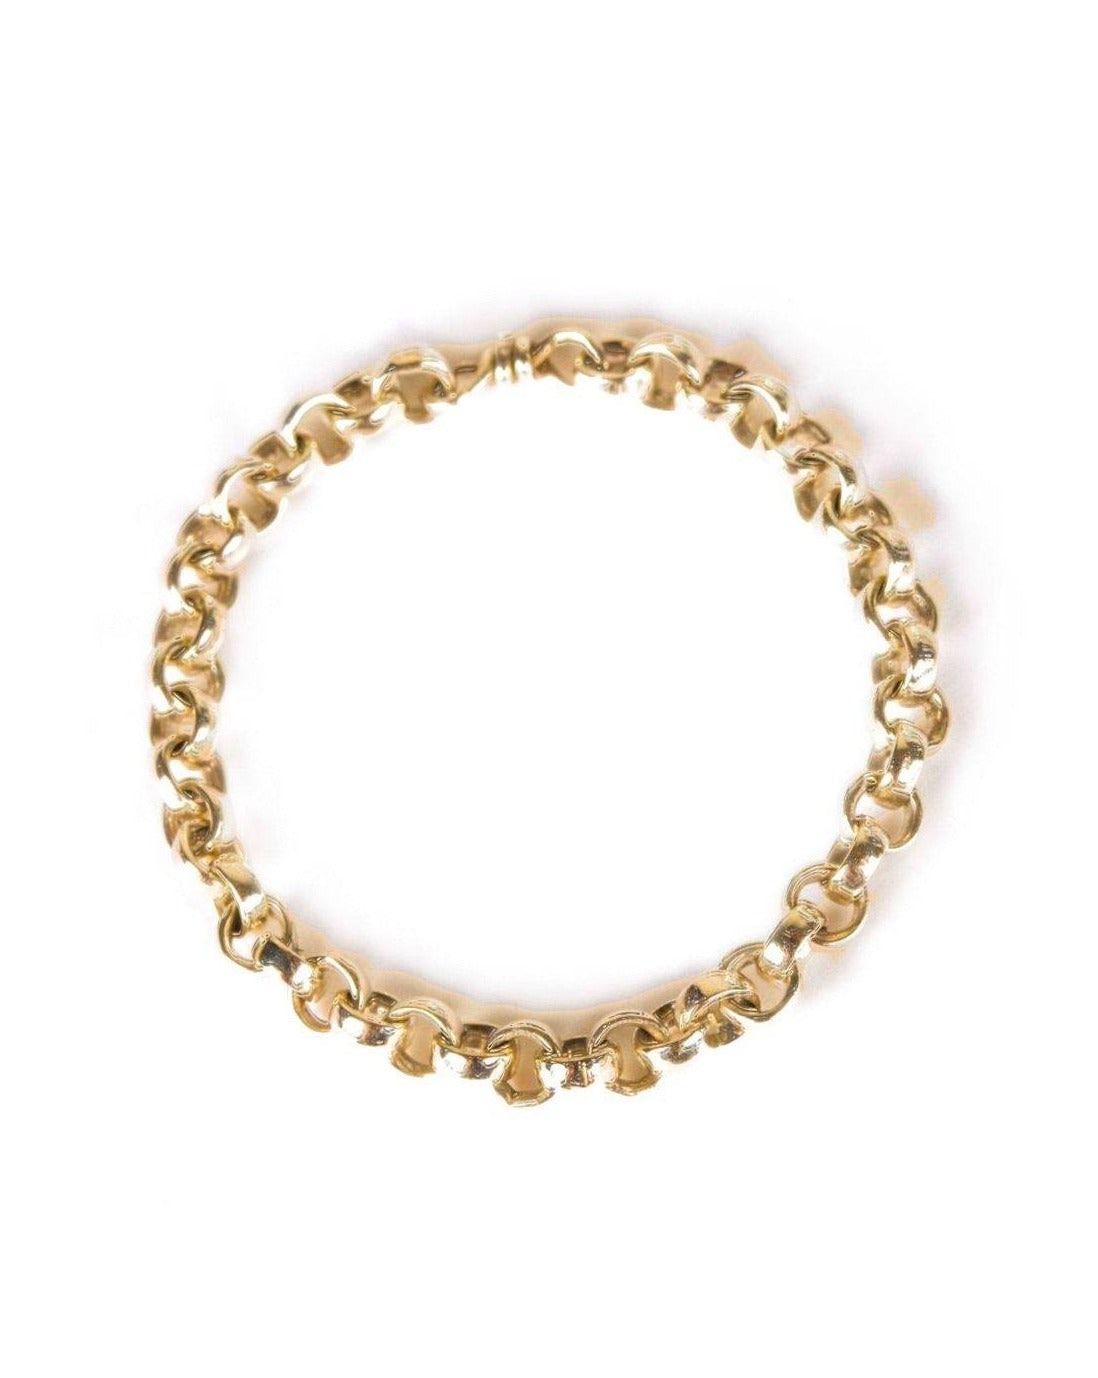 Rollo Chain Ring by KOZAKH. A 2.3mm Rollo chain ring, crafted in 14K Gold Filled.